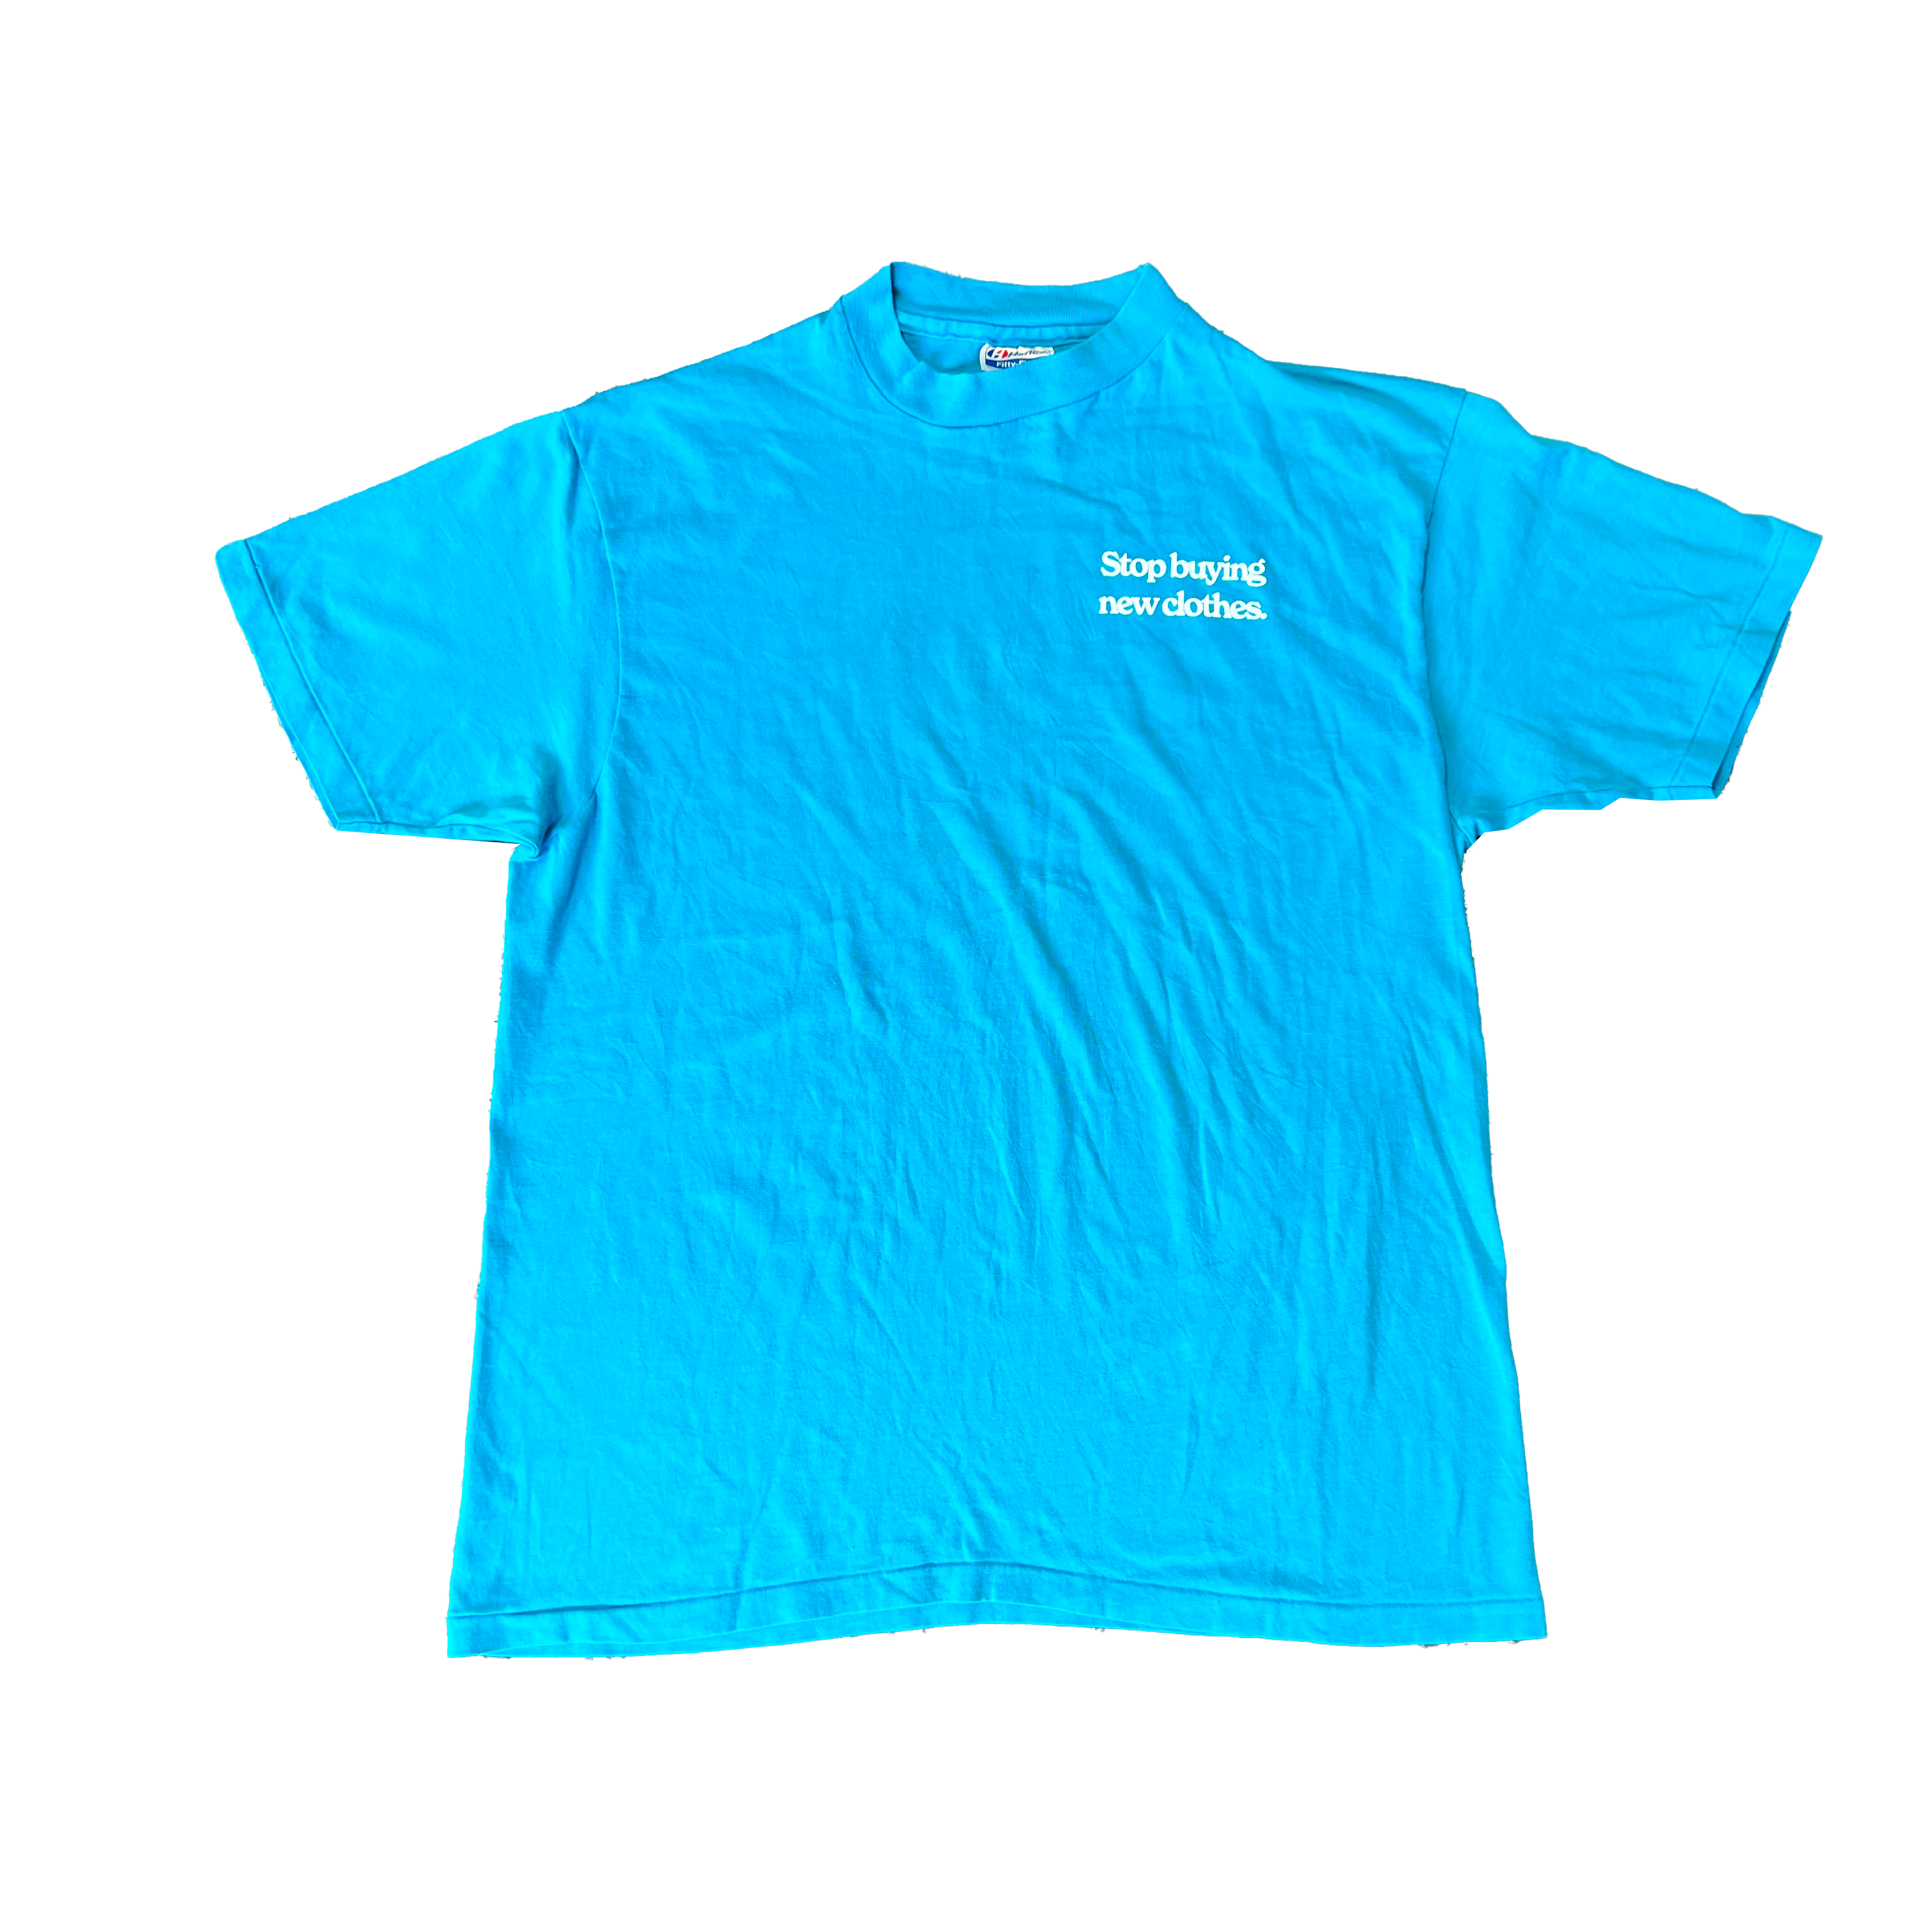 STOP BUYING NEW UPCYCLED TEE (TEAL M/L)